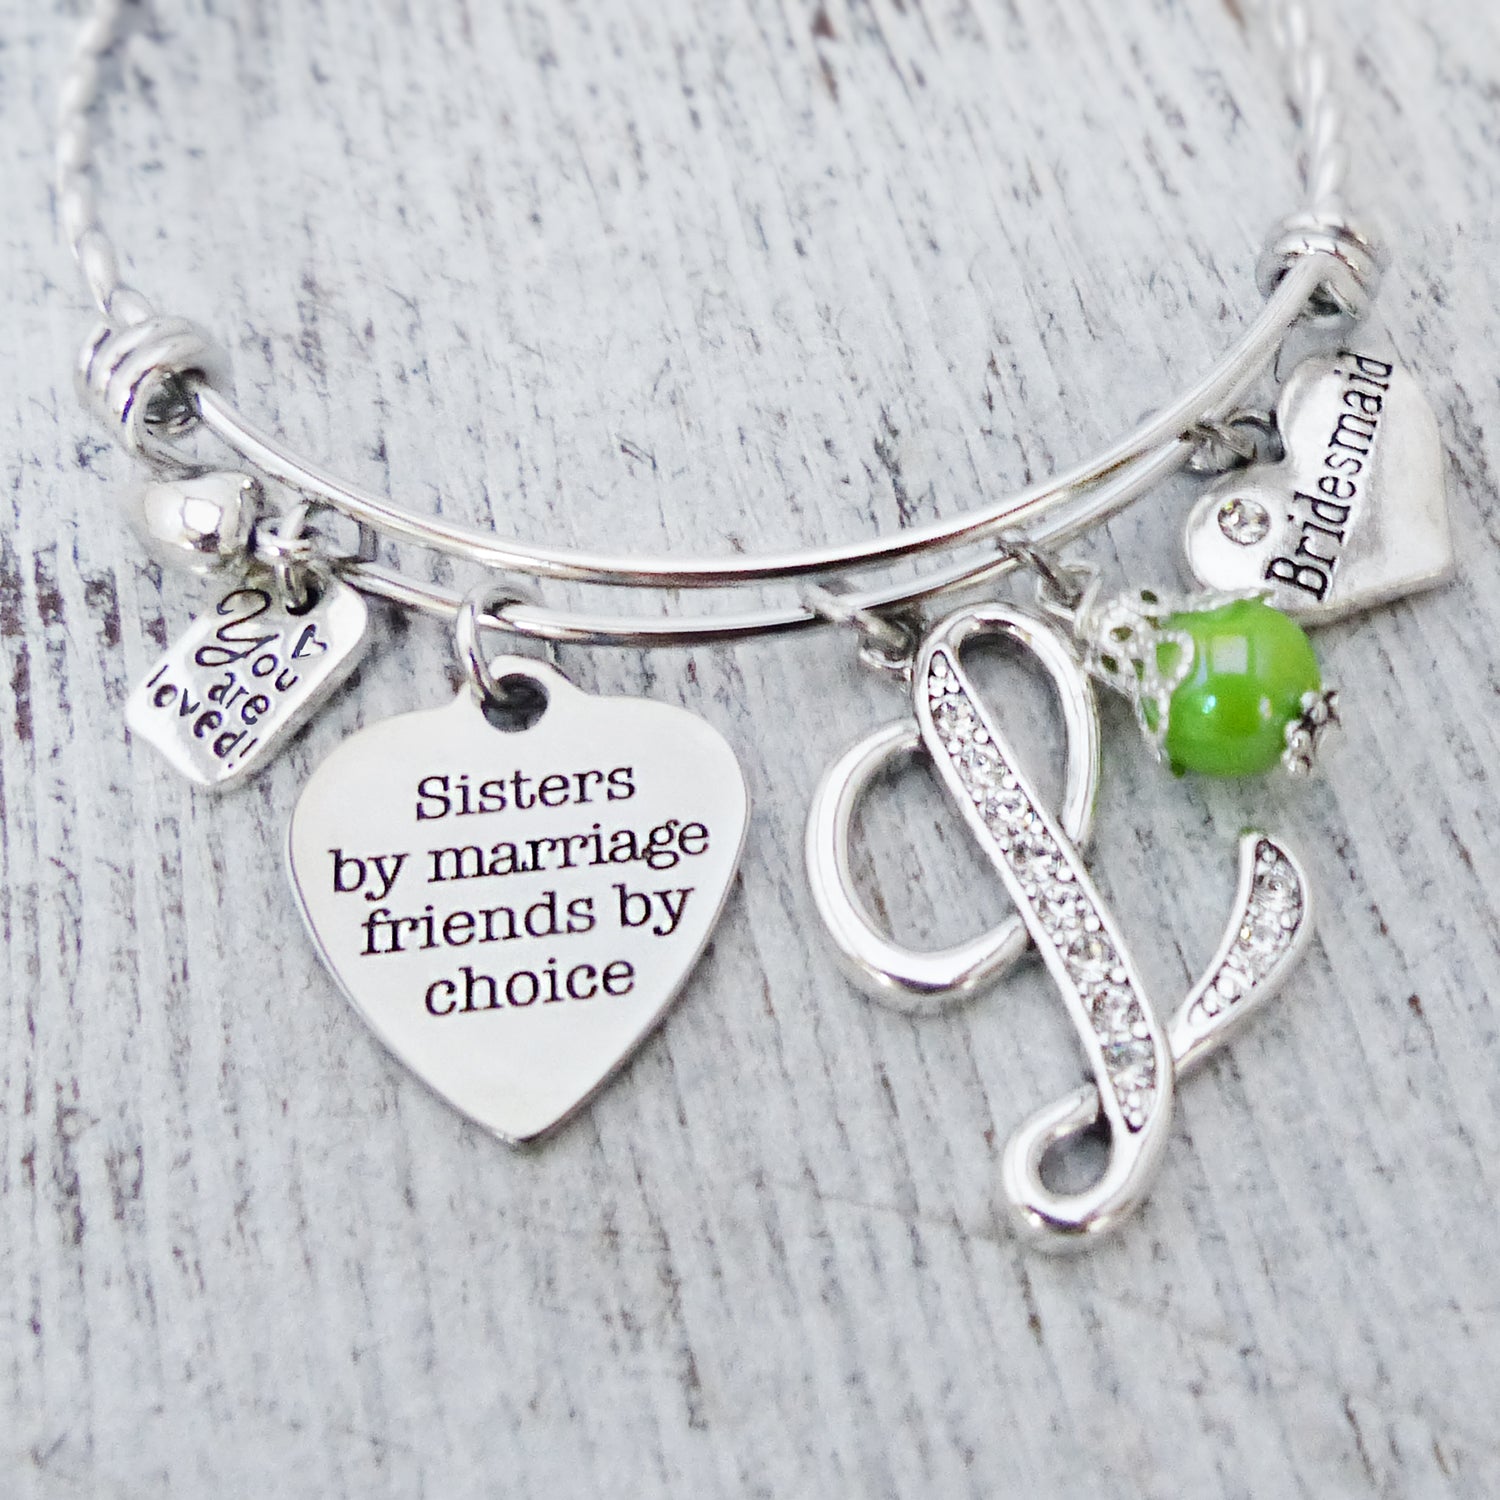 Personalized Bridesmaid Gift, Sisters by Marriage Friends by Choice, Bridal Party Gifts, Sister in Law Gifts